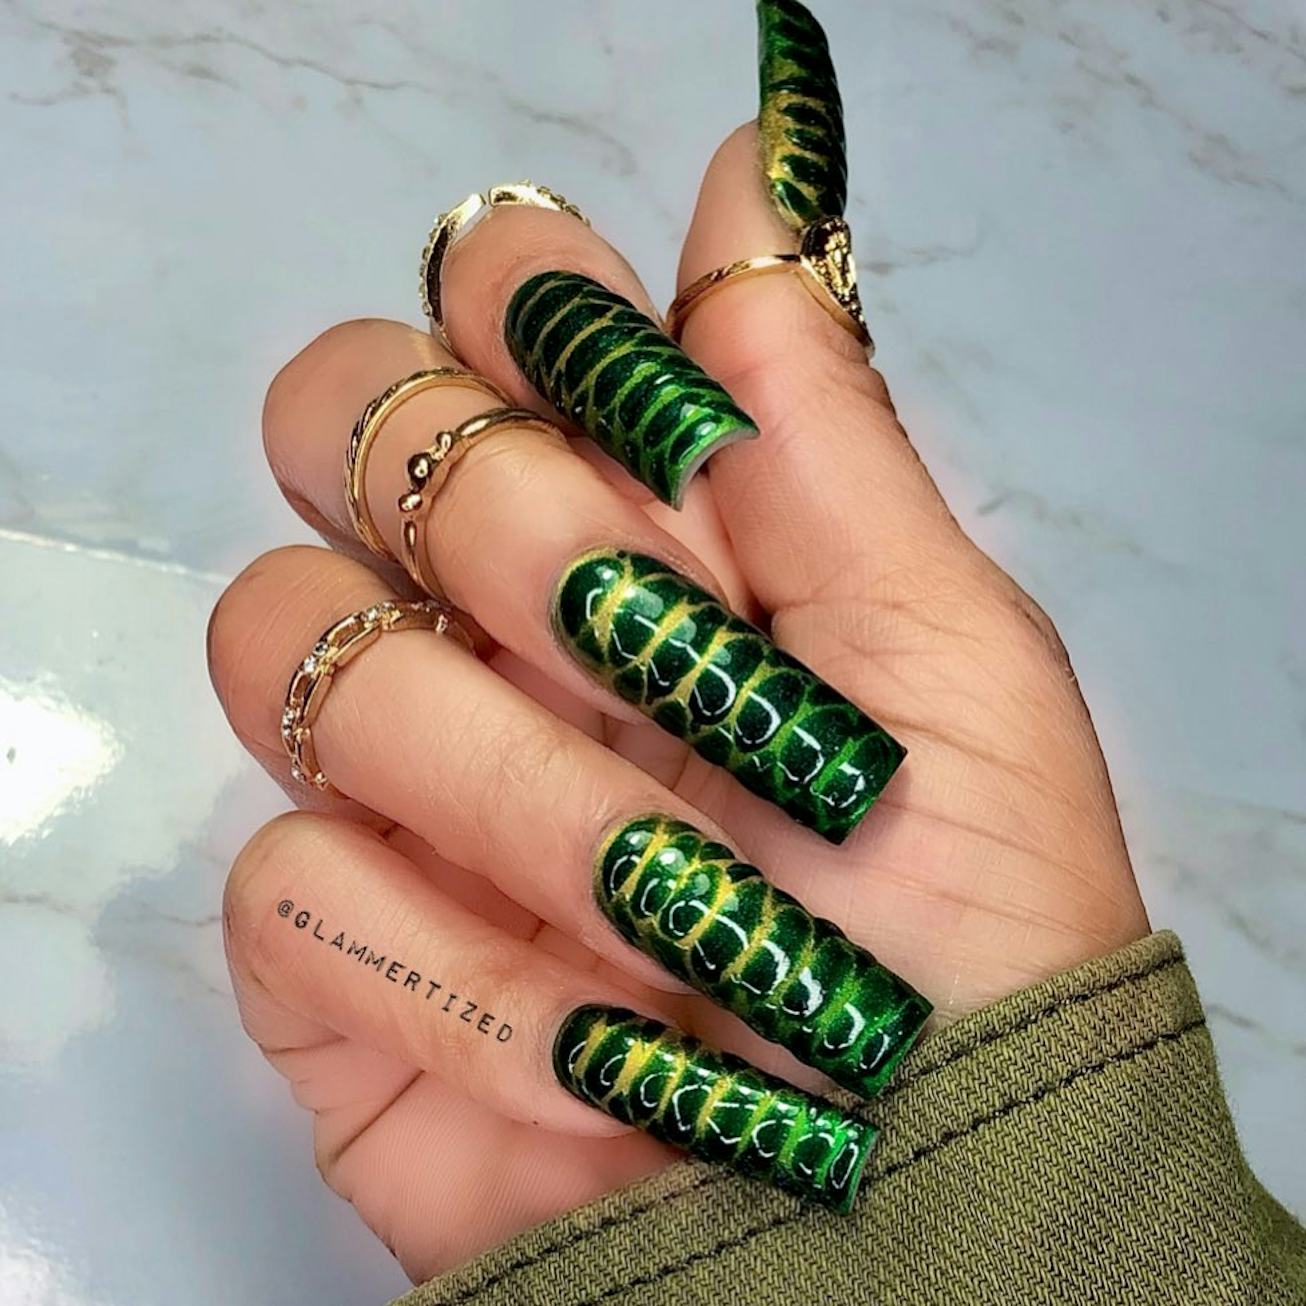 Woman's hand with green and yellow crocodile nail manicure